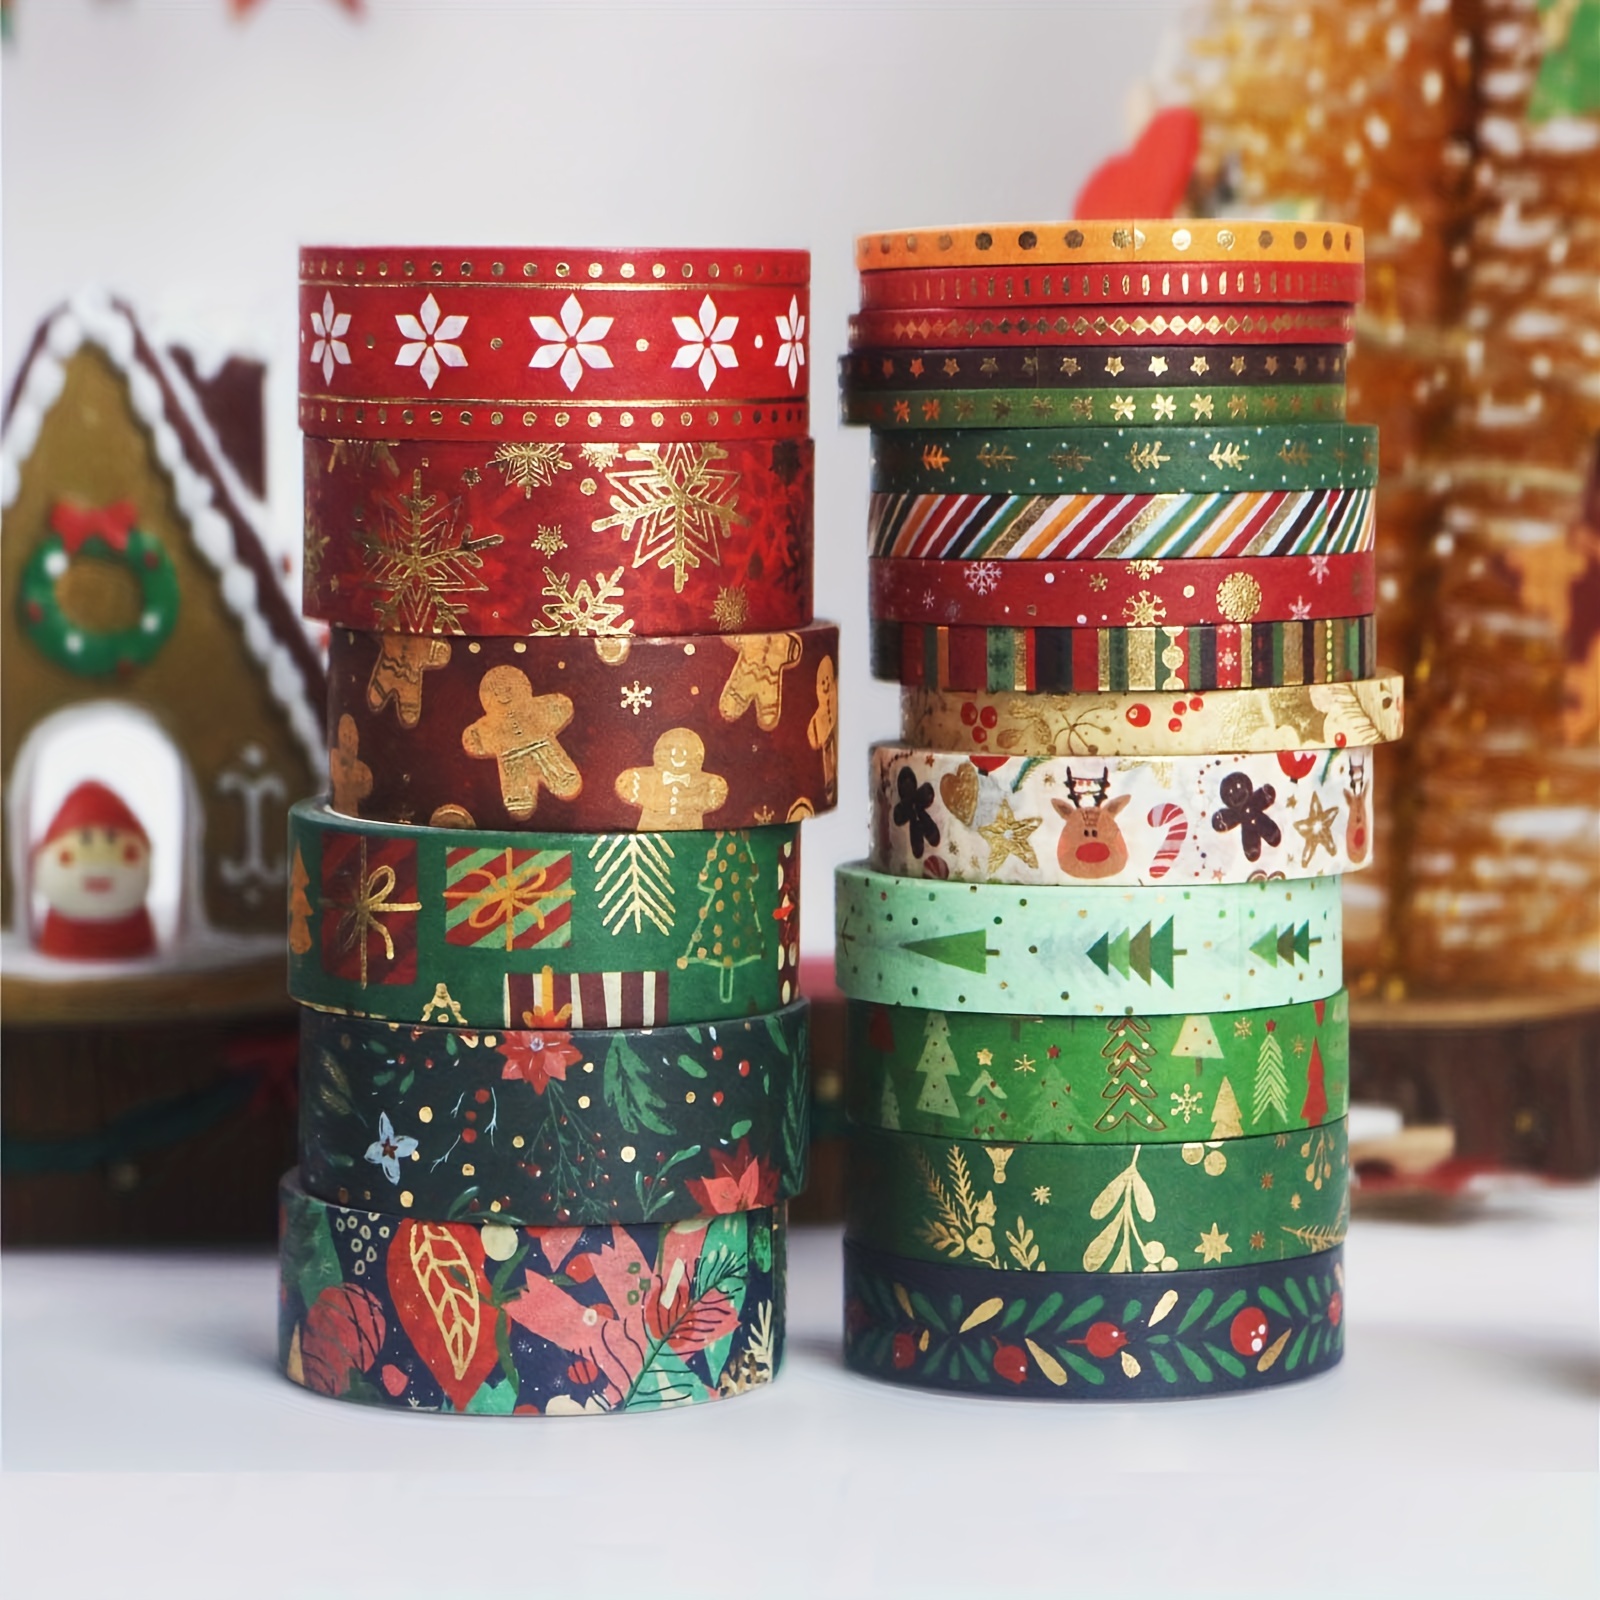 Christmas Holiday Washi Tape - 6 Rolls Winter Foil Washi Tape Set with  Snowflake, Tree, Deer, Striped, Perfect for Bullet Journal, Christmas Card